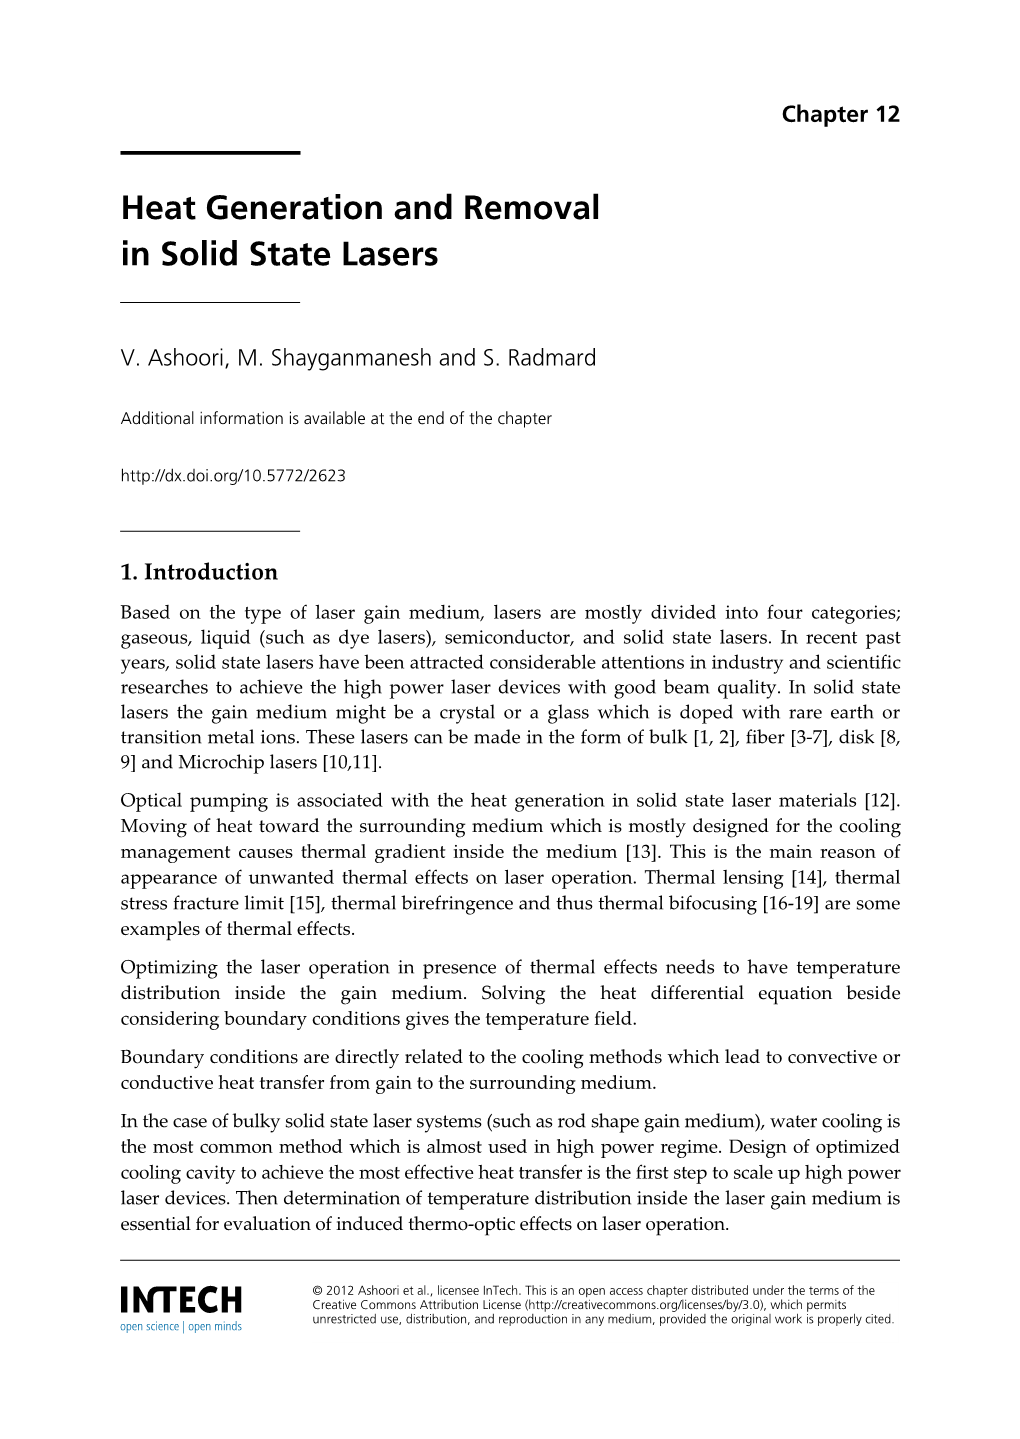 Heat Generation and Removal in Solid State Lasers